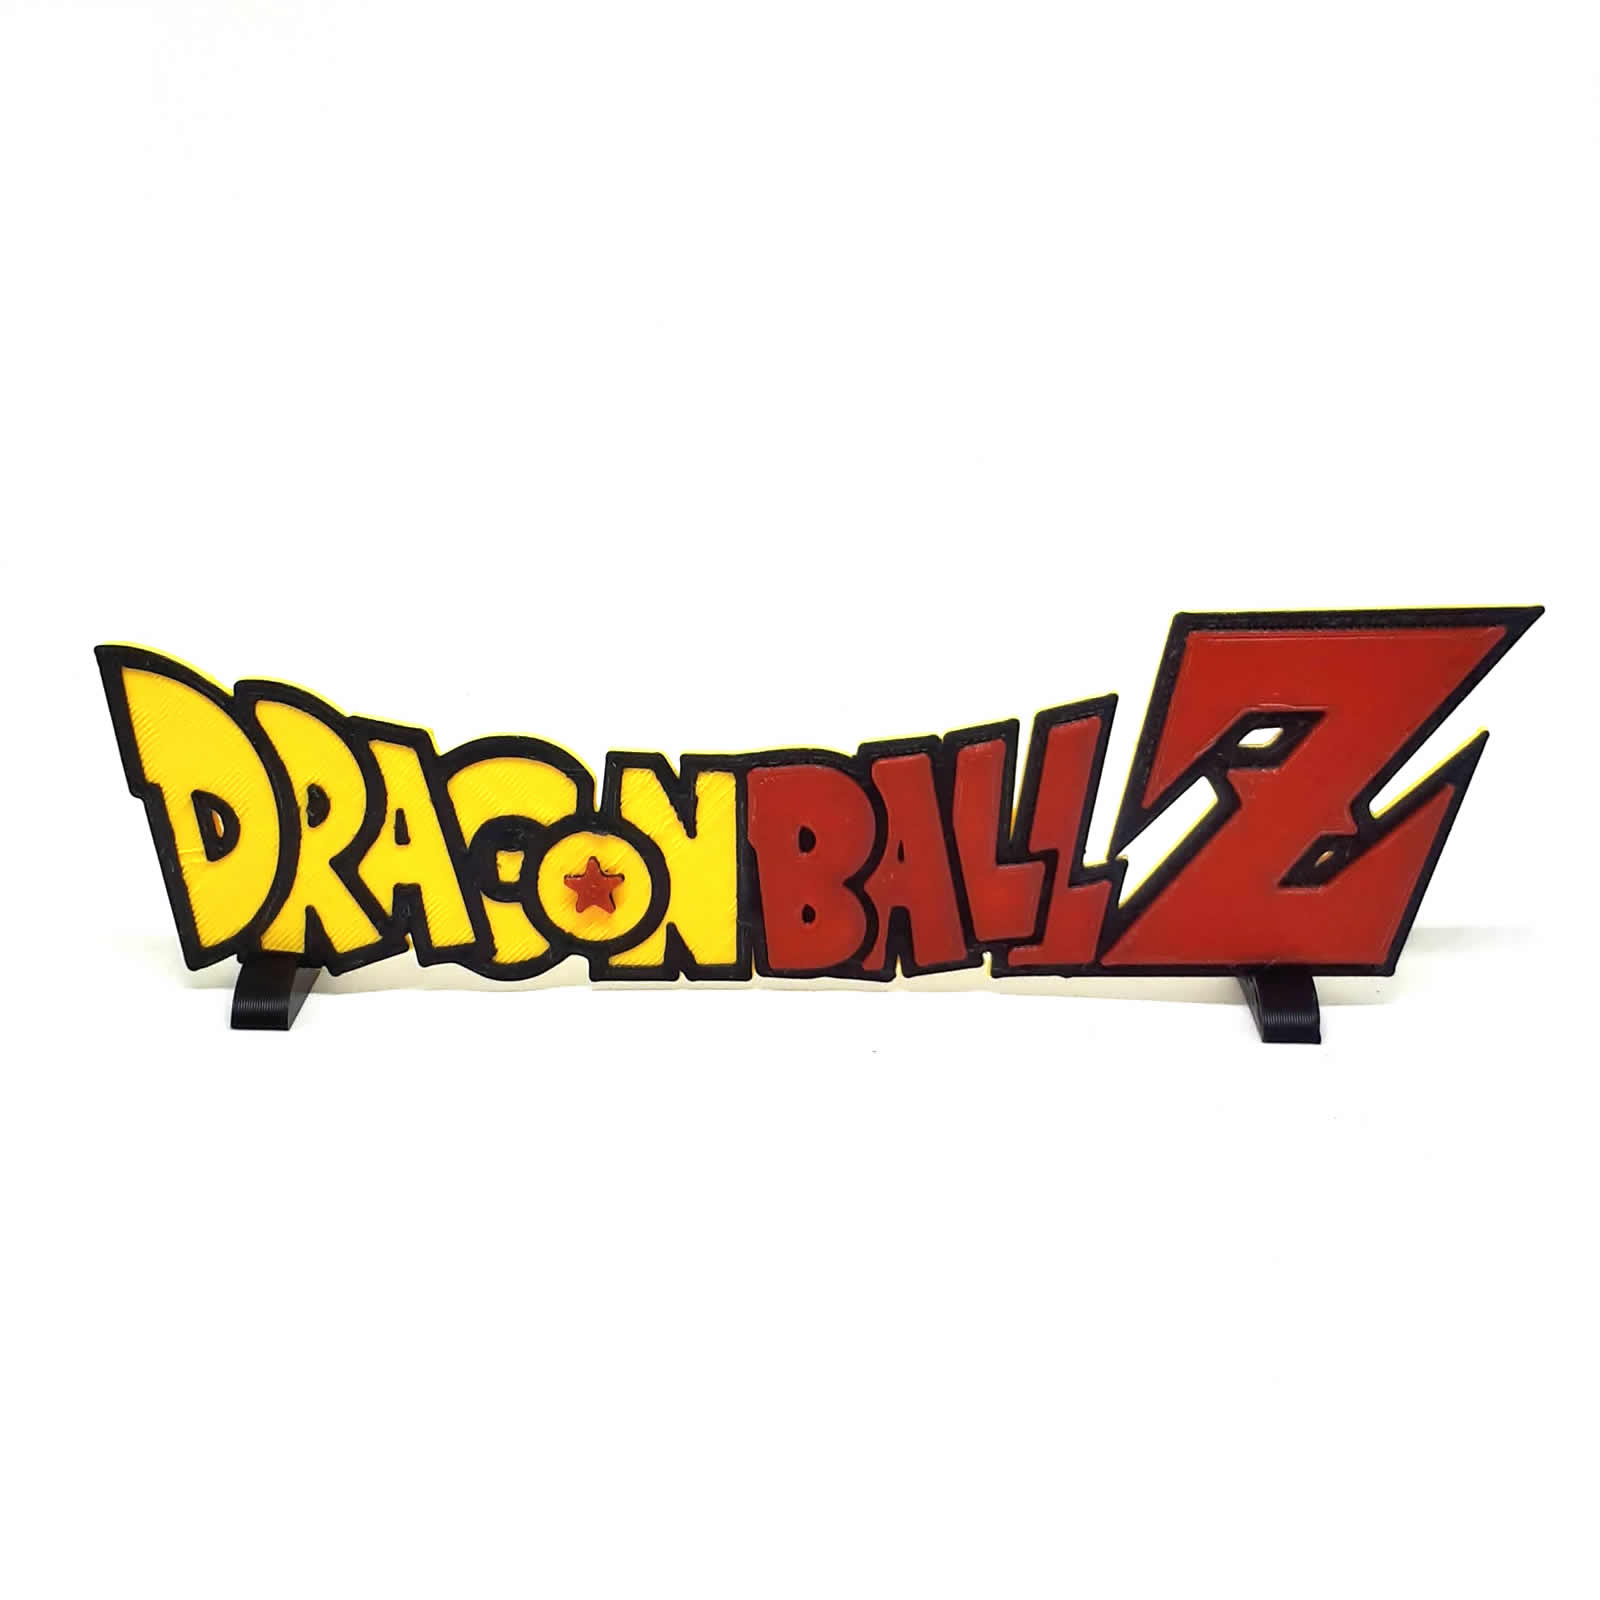 Dragon Ball Z Vector Art, Icons, and Graphics for Free Download